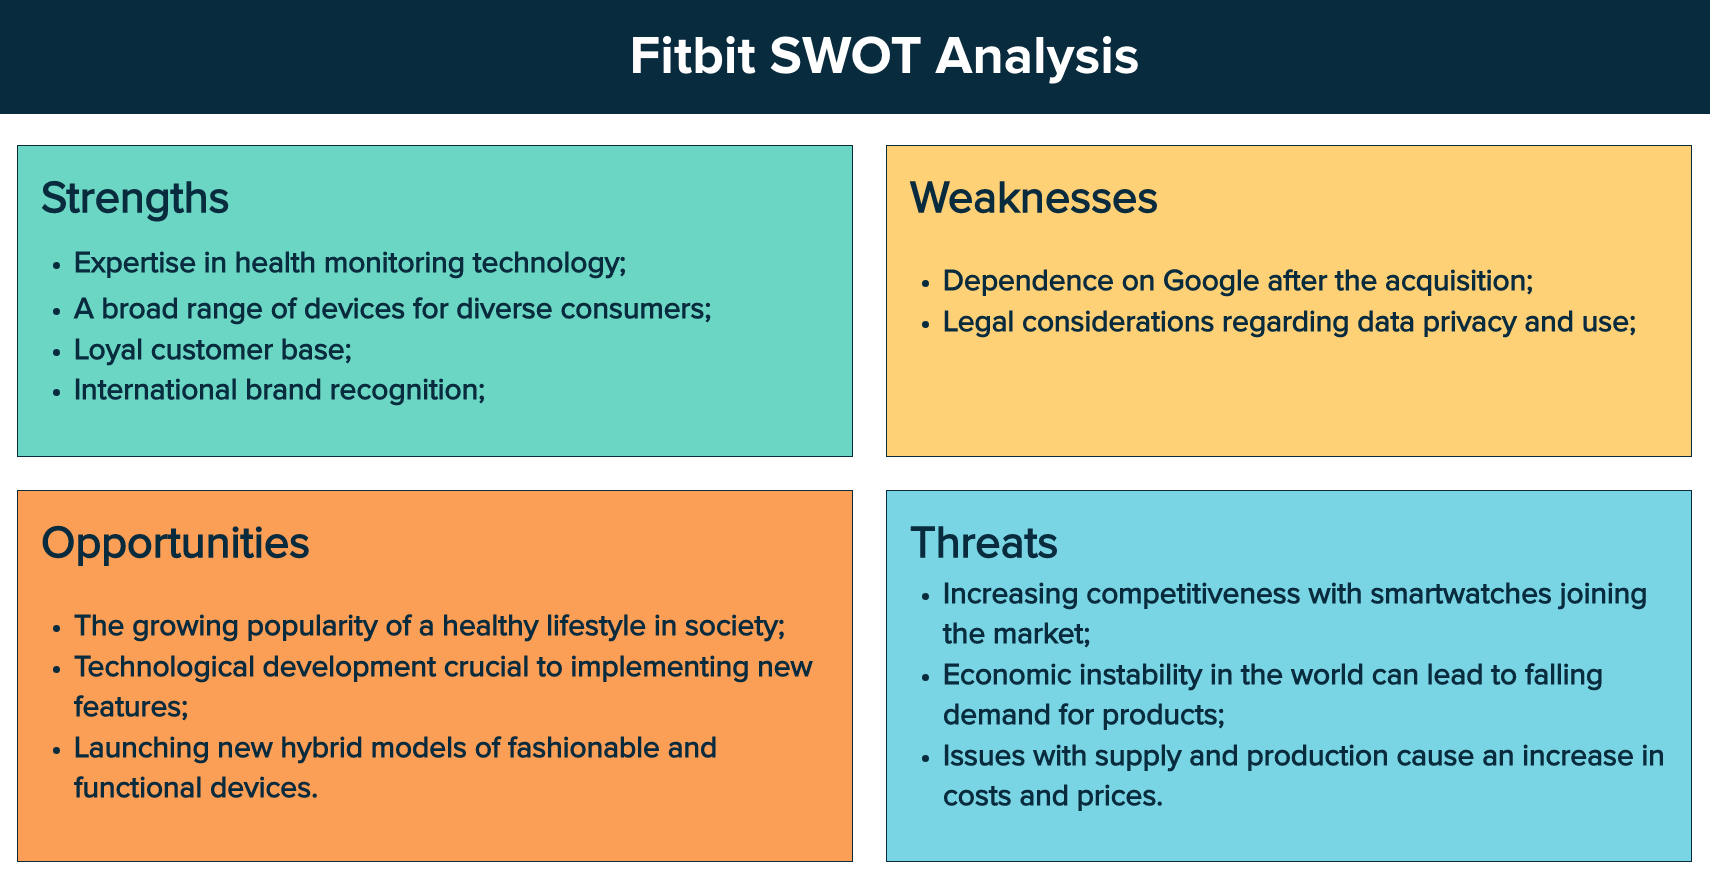 SWOT Analysis for Fitbit